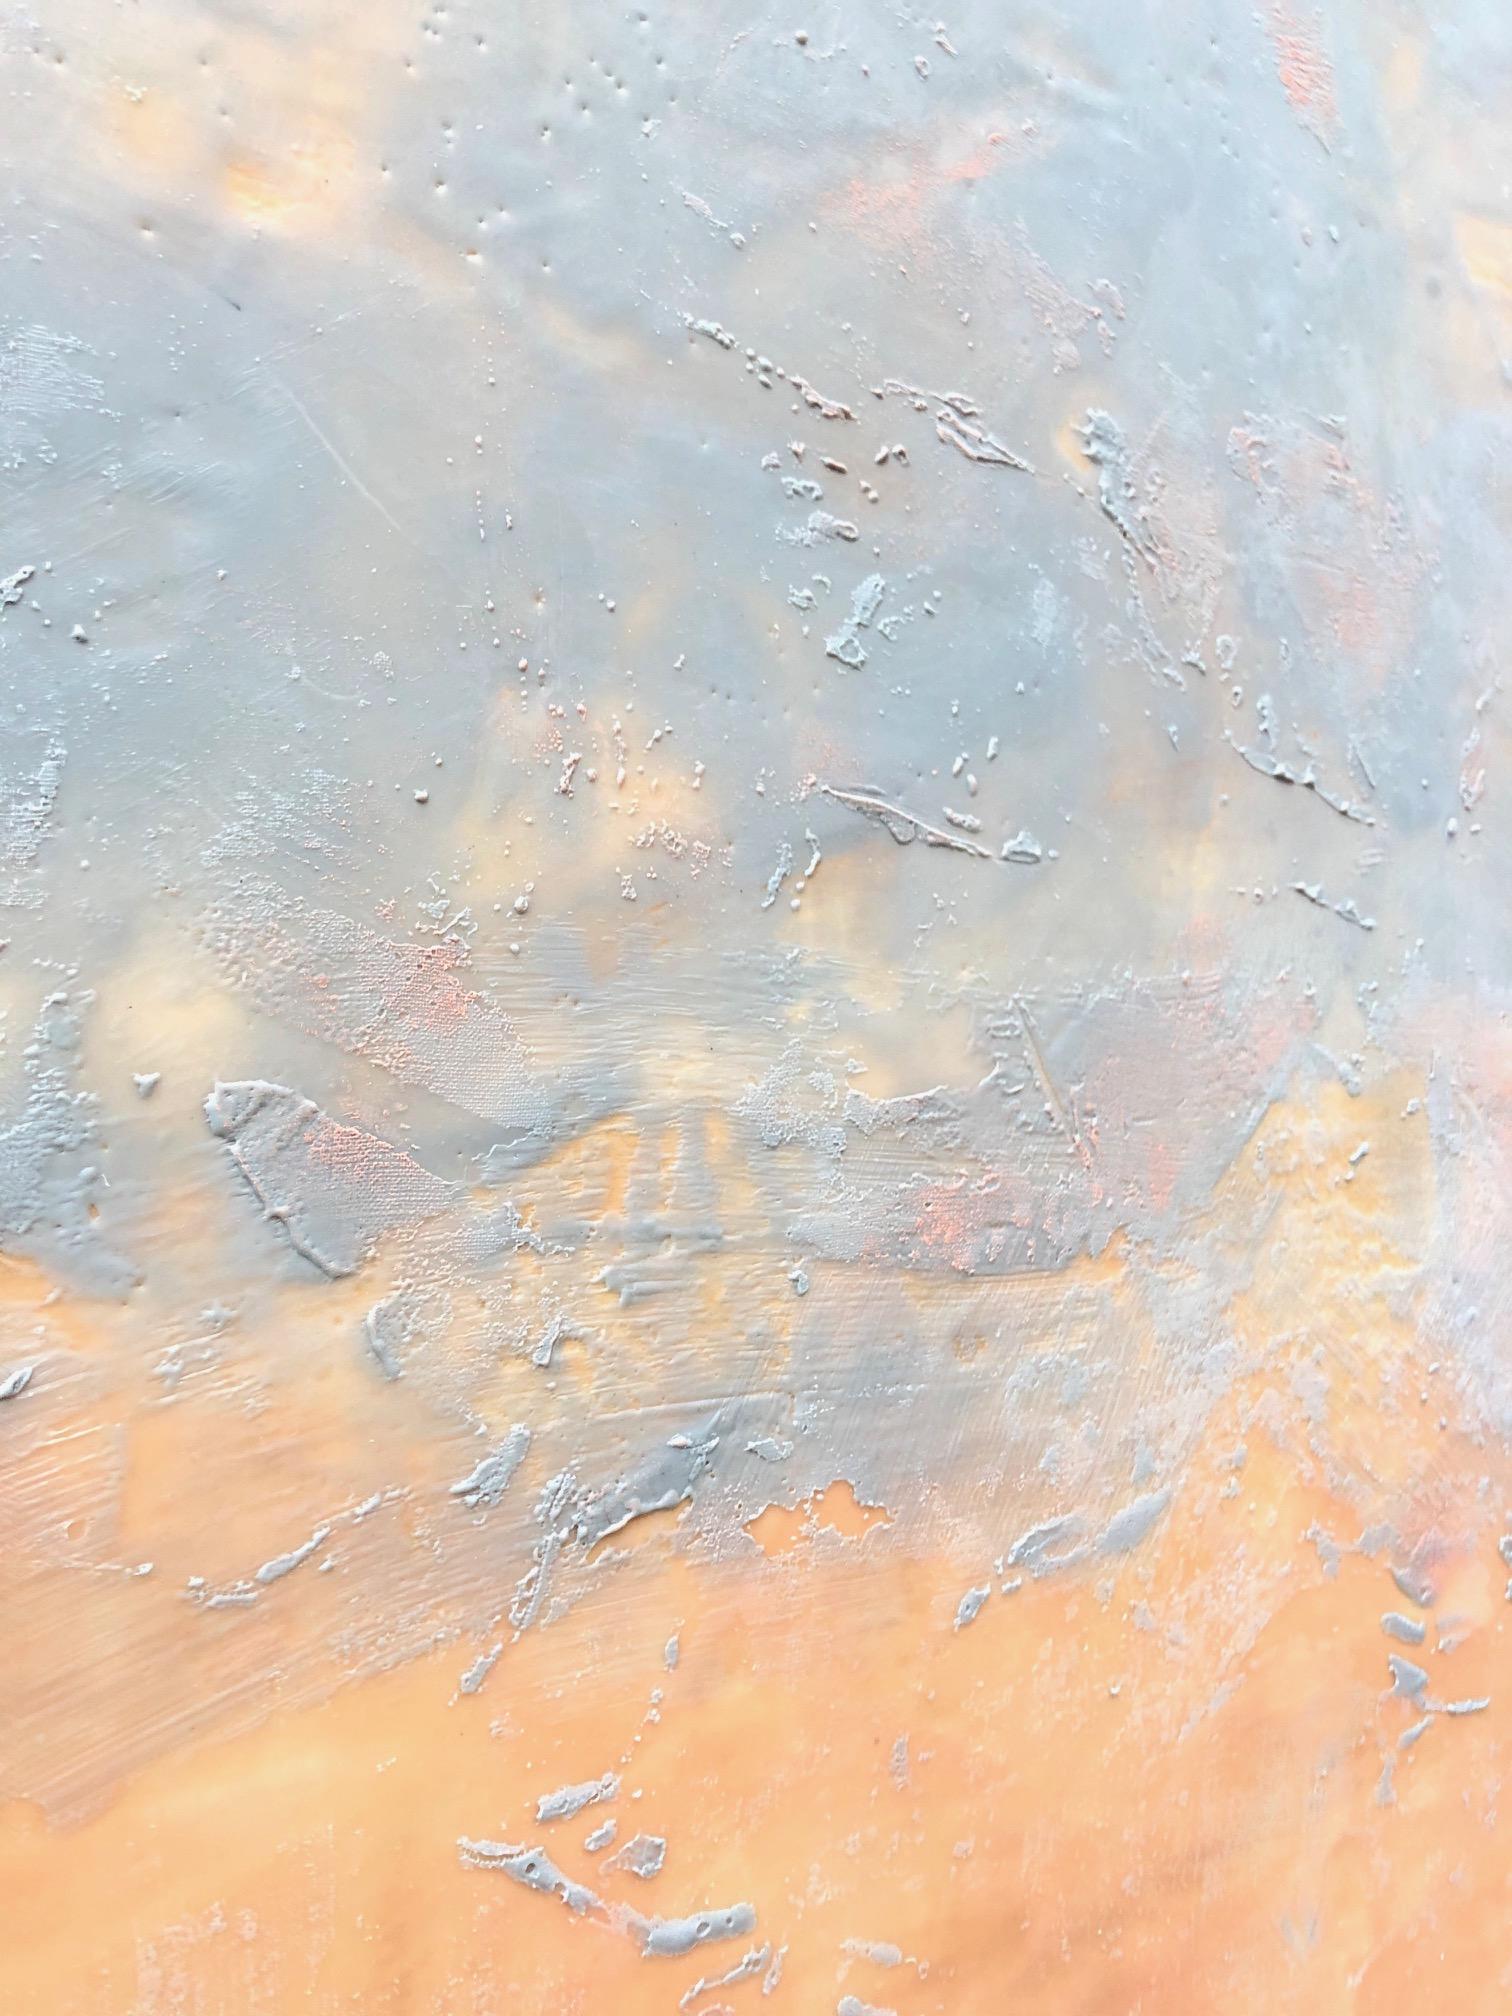 Ethereal - Large Square Encaustic (Wax) Abstract Painting with Peach, and Blue 5